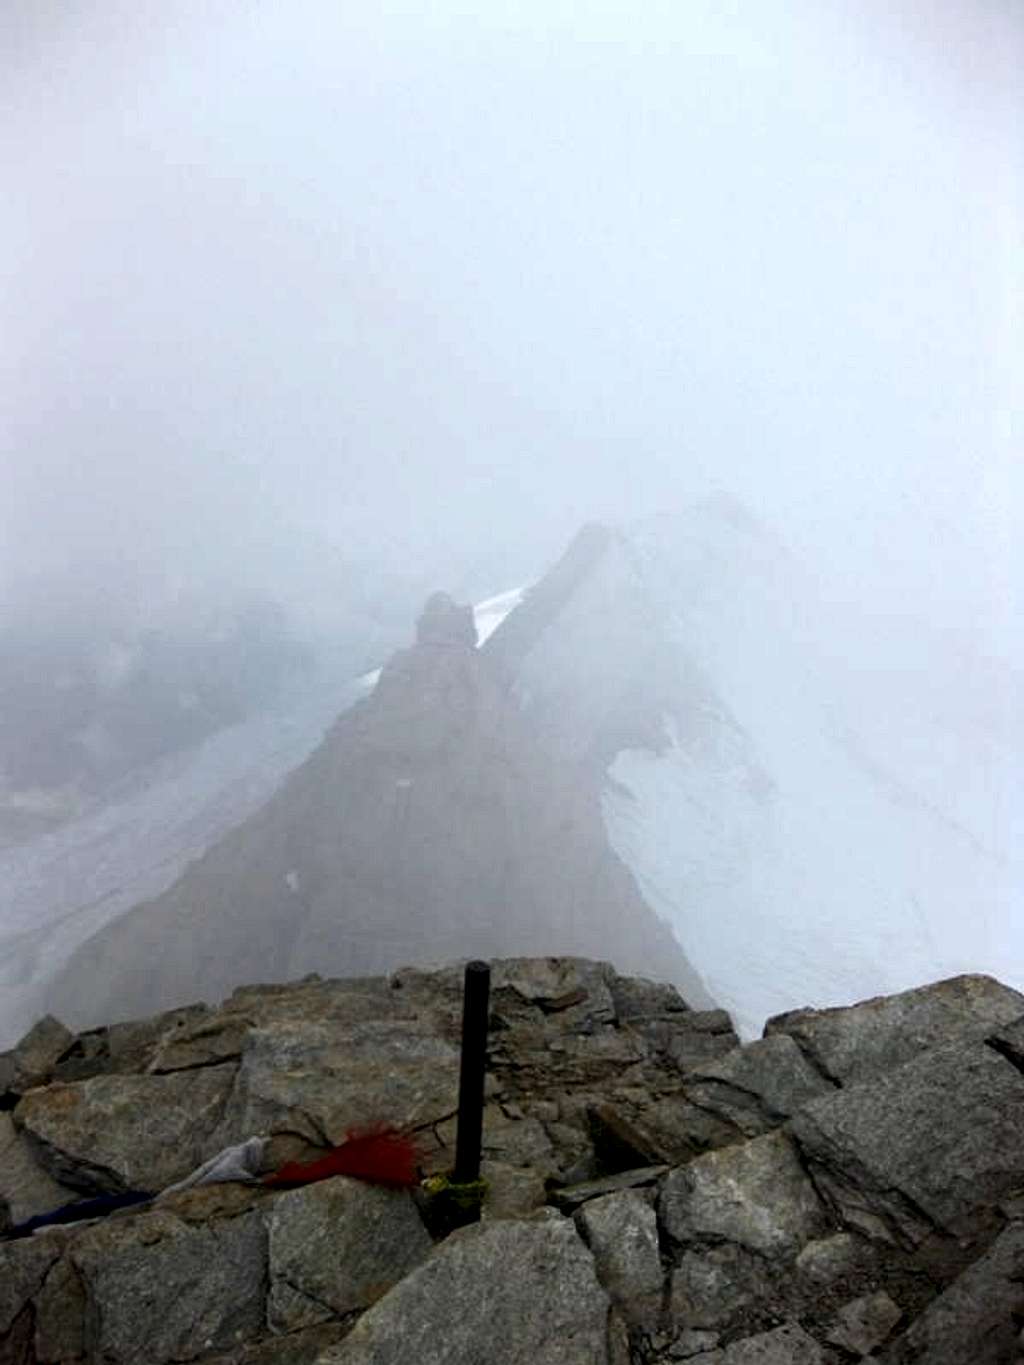 Romariskopf summit - the NW ridge barely visible in the clouds